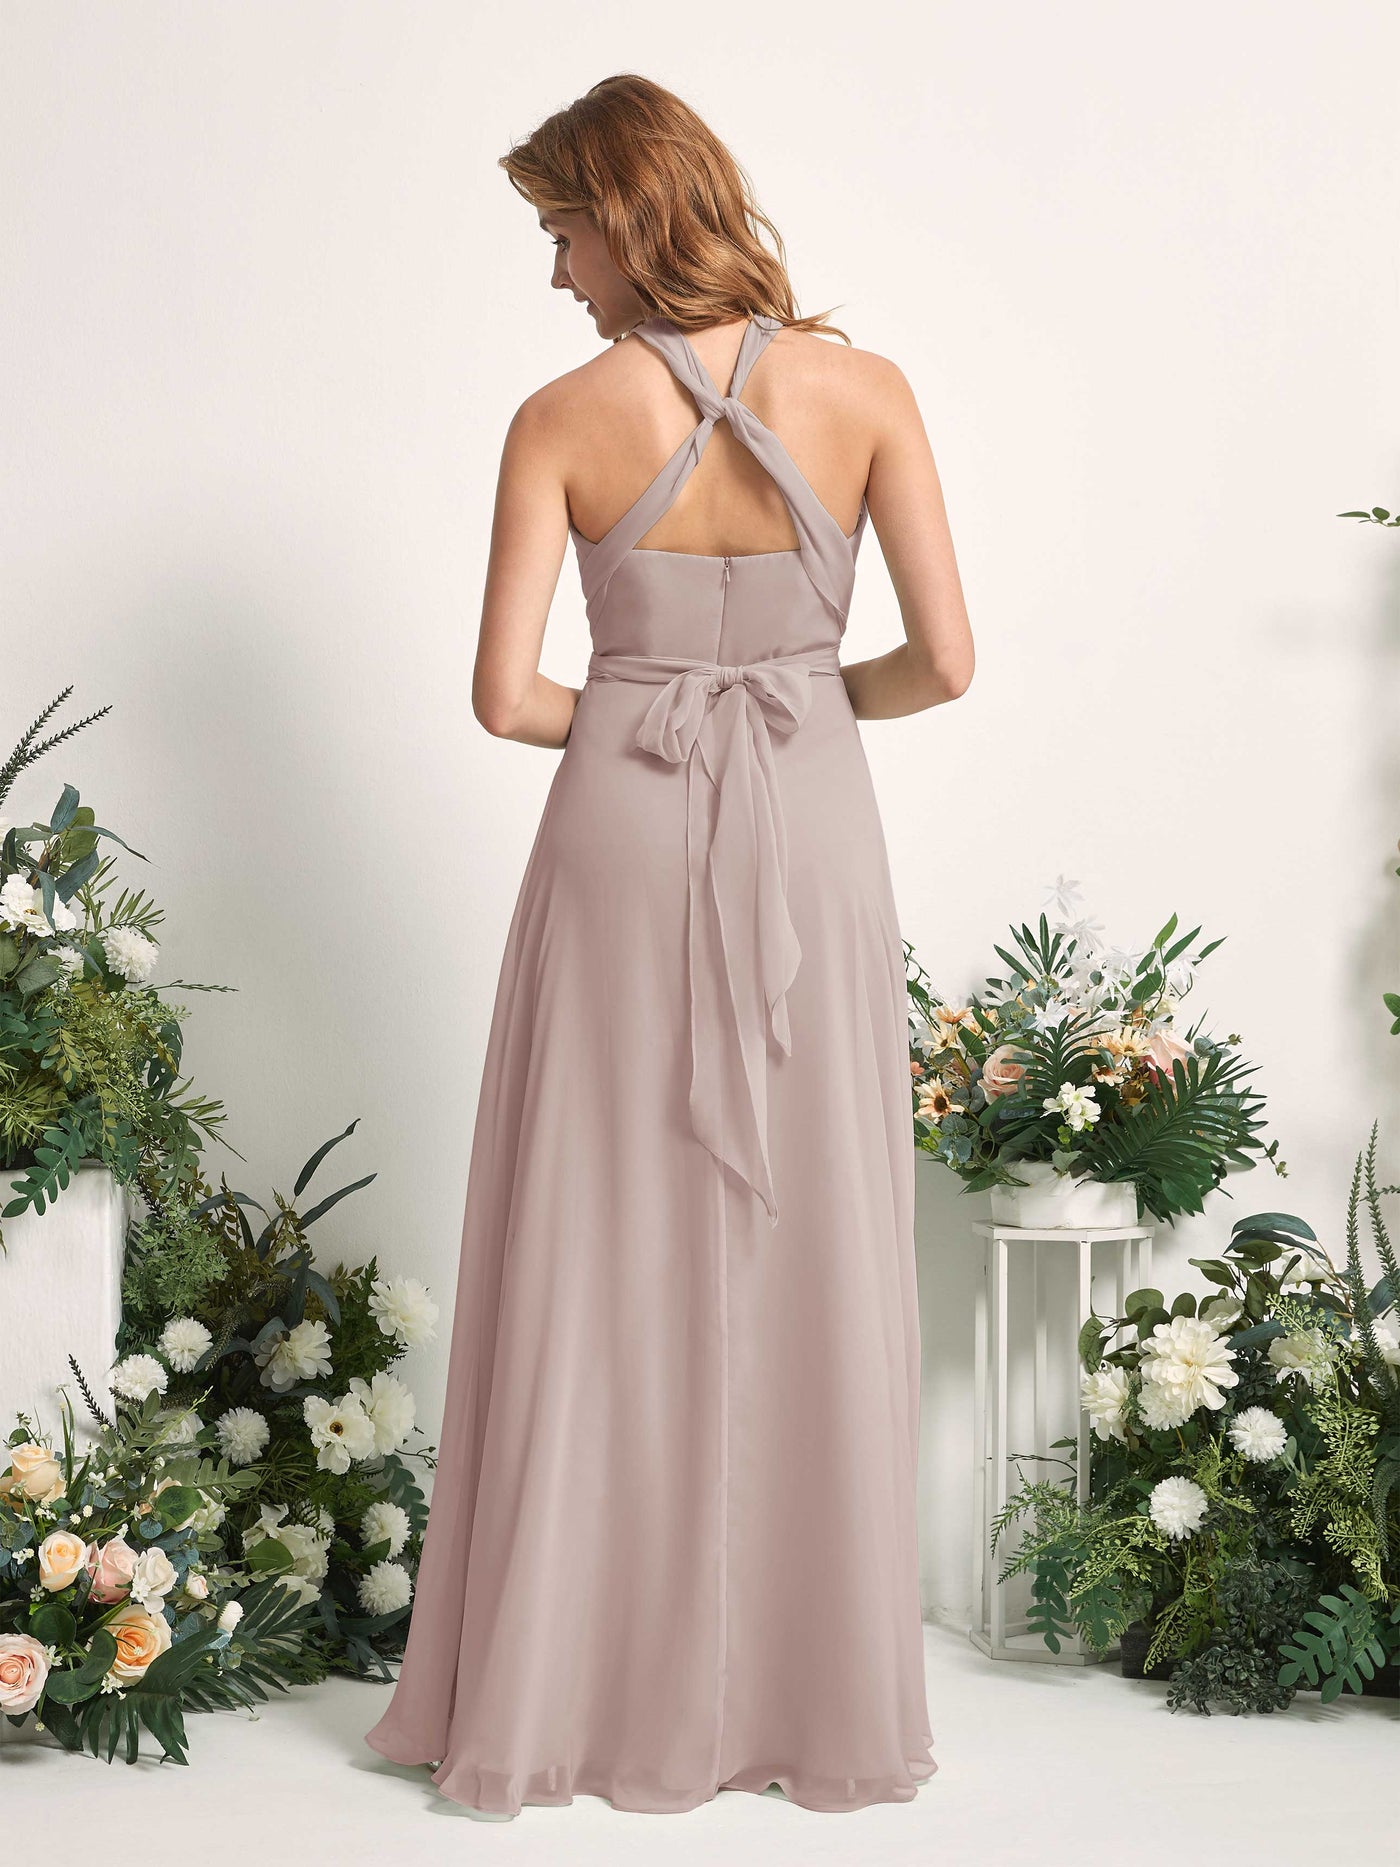 Bridesmaid Dress A-line Chiffon Halter Full Length Short Sleeves Wedding Party Dress - Taupe (81226324)#color_taupe